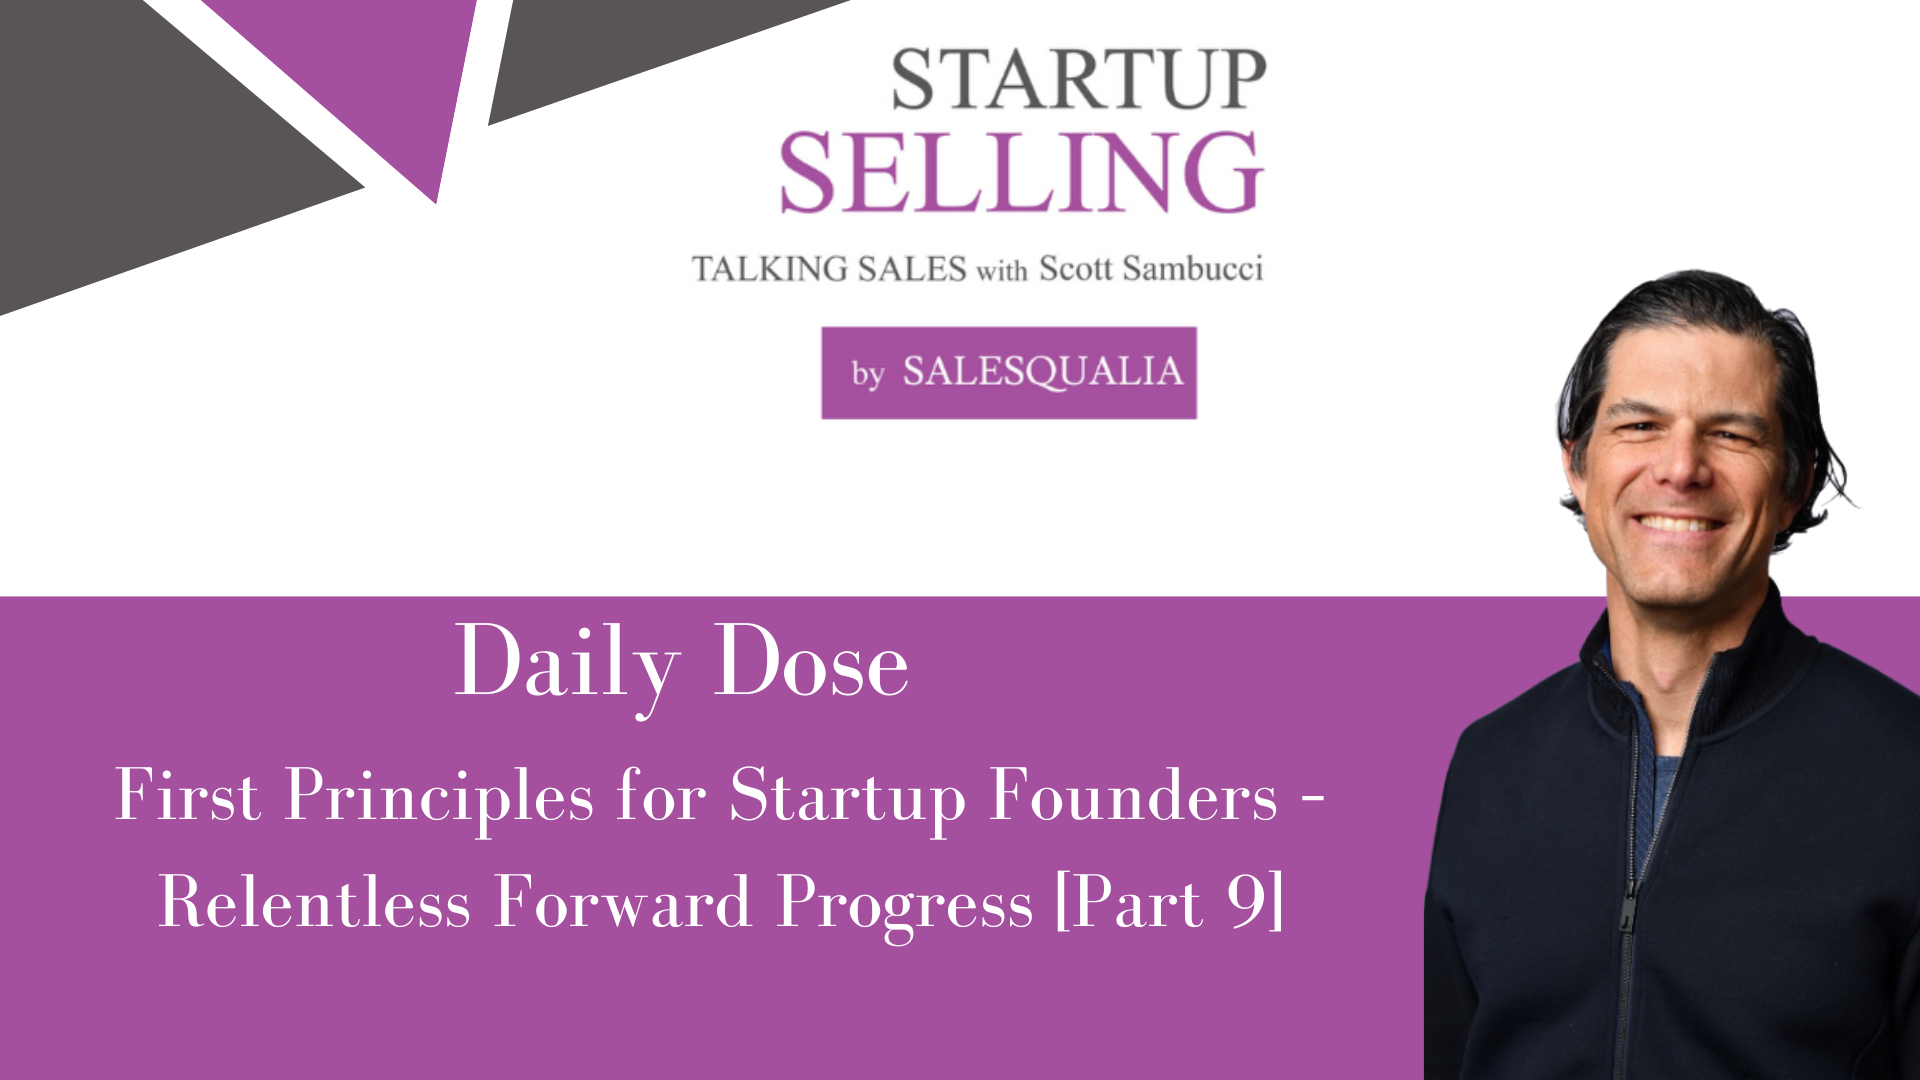 Daily Dose: First Principles for Startup Founders – Relentless Forward Progress [Part 9]